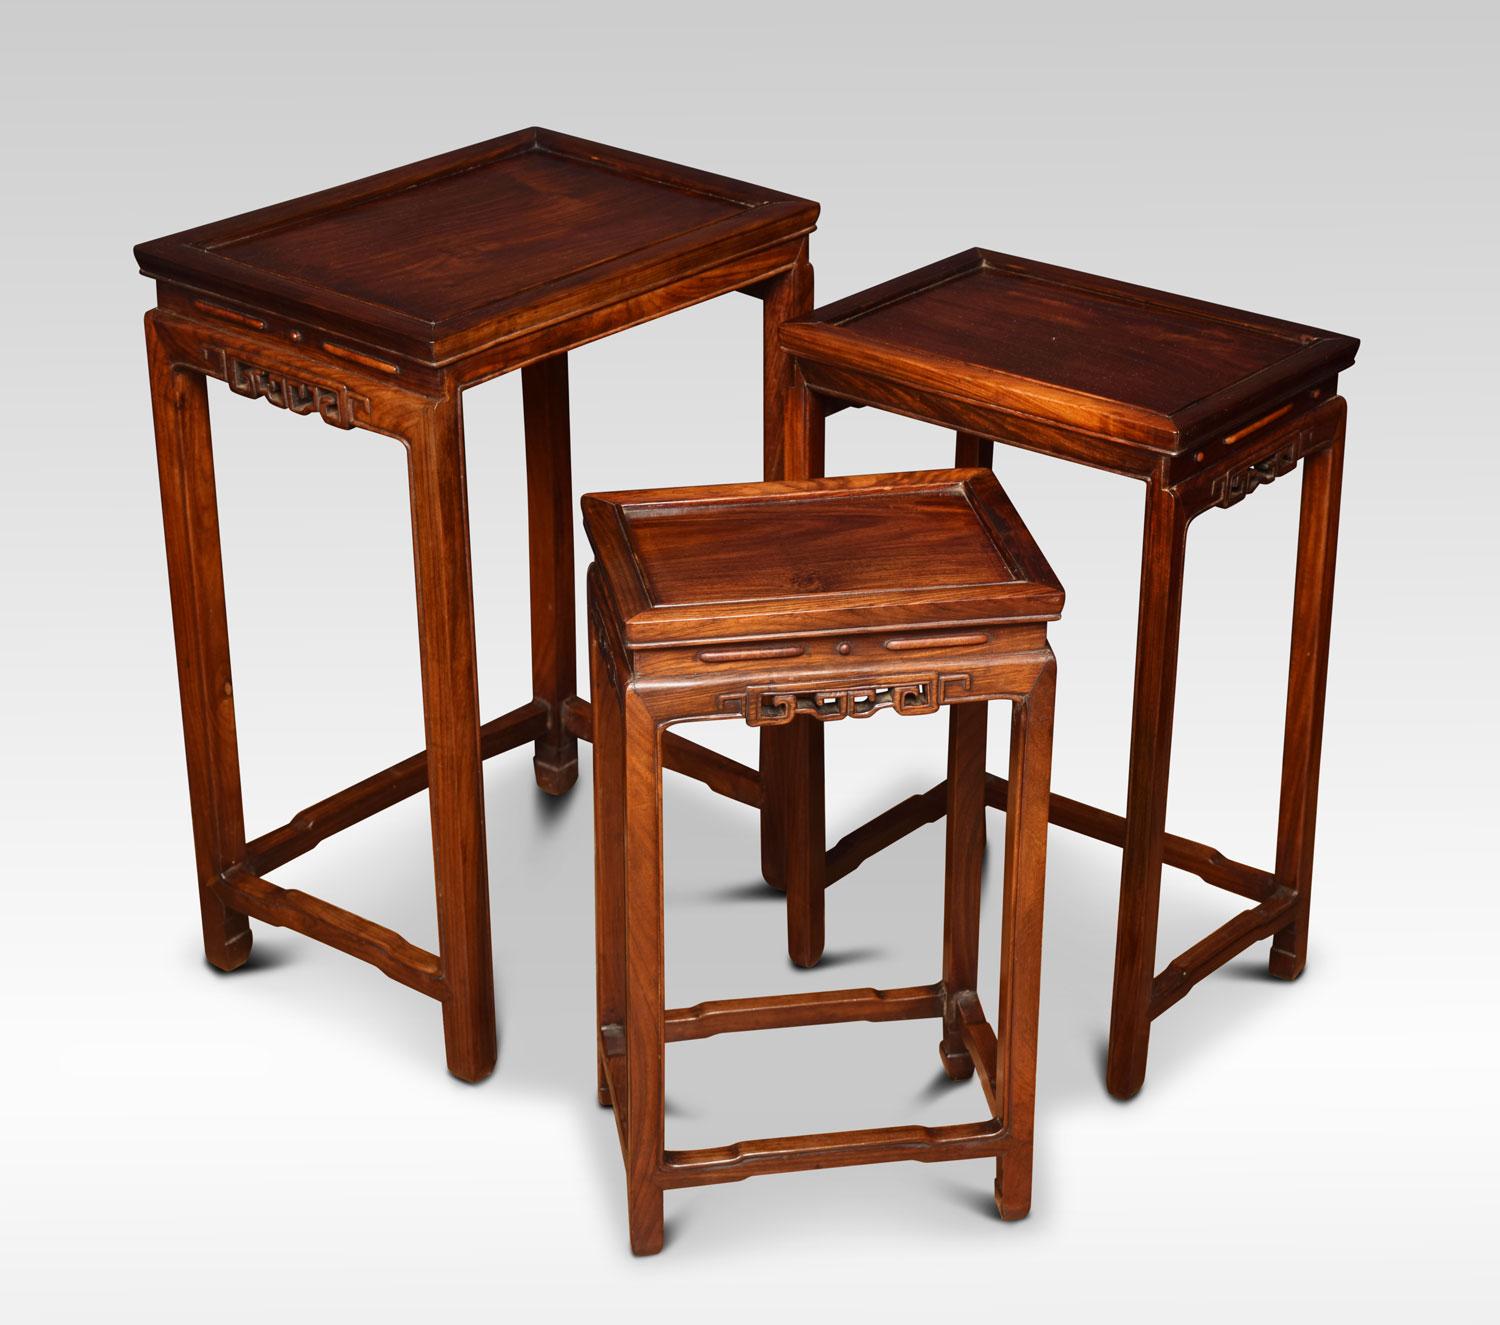 Nest of three Chinese rosewood tables, each with a recessed panel to the rectangular top and a carved frieze on four slender supports with conforming stretchers.
Dimensions:
Height 24 inches
Width 16.5 inches
Depth 12 inches.